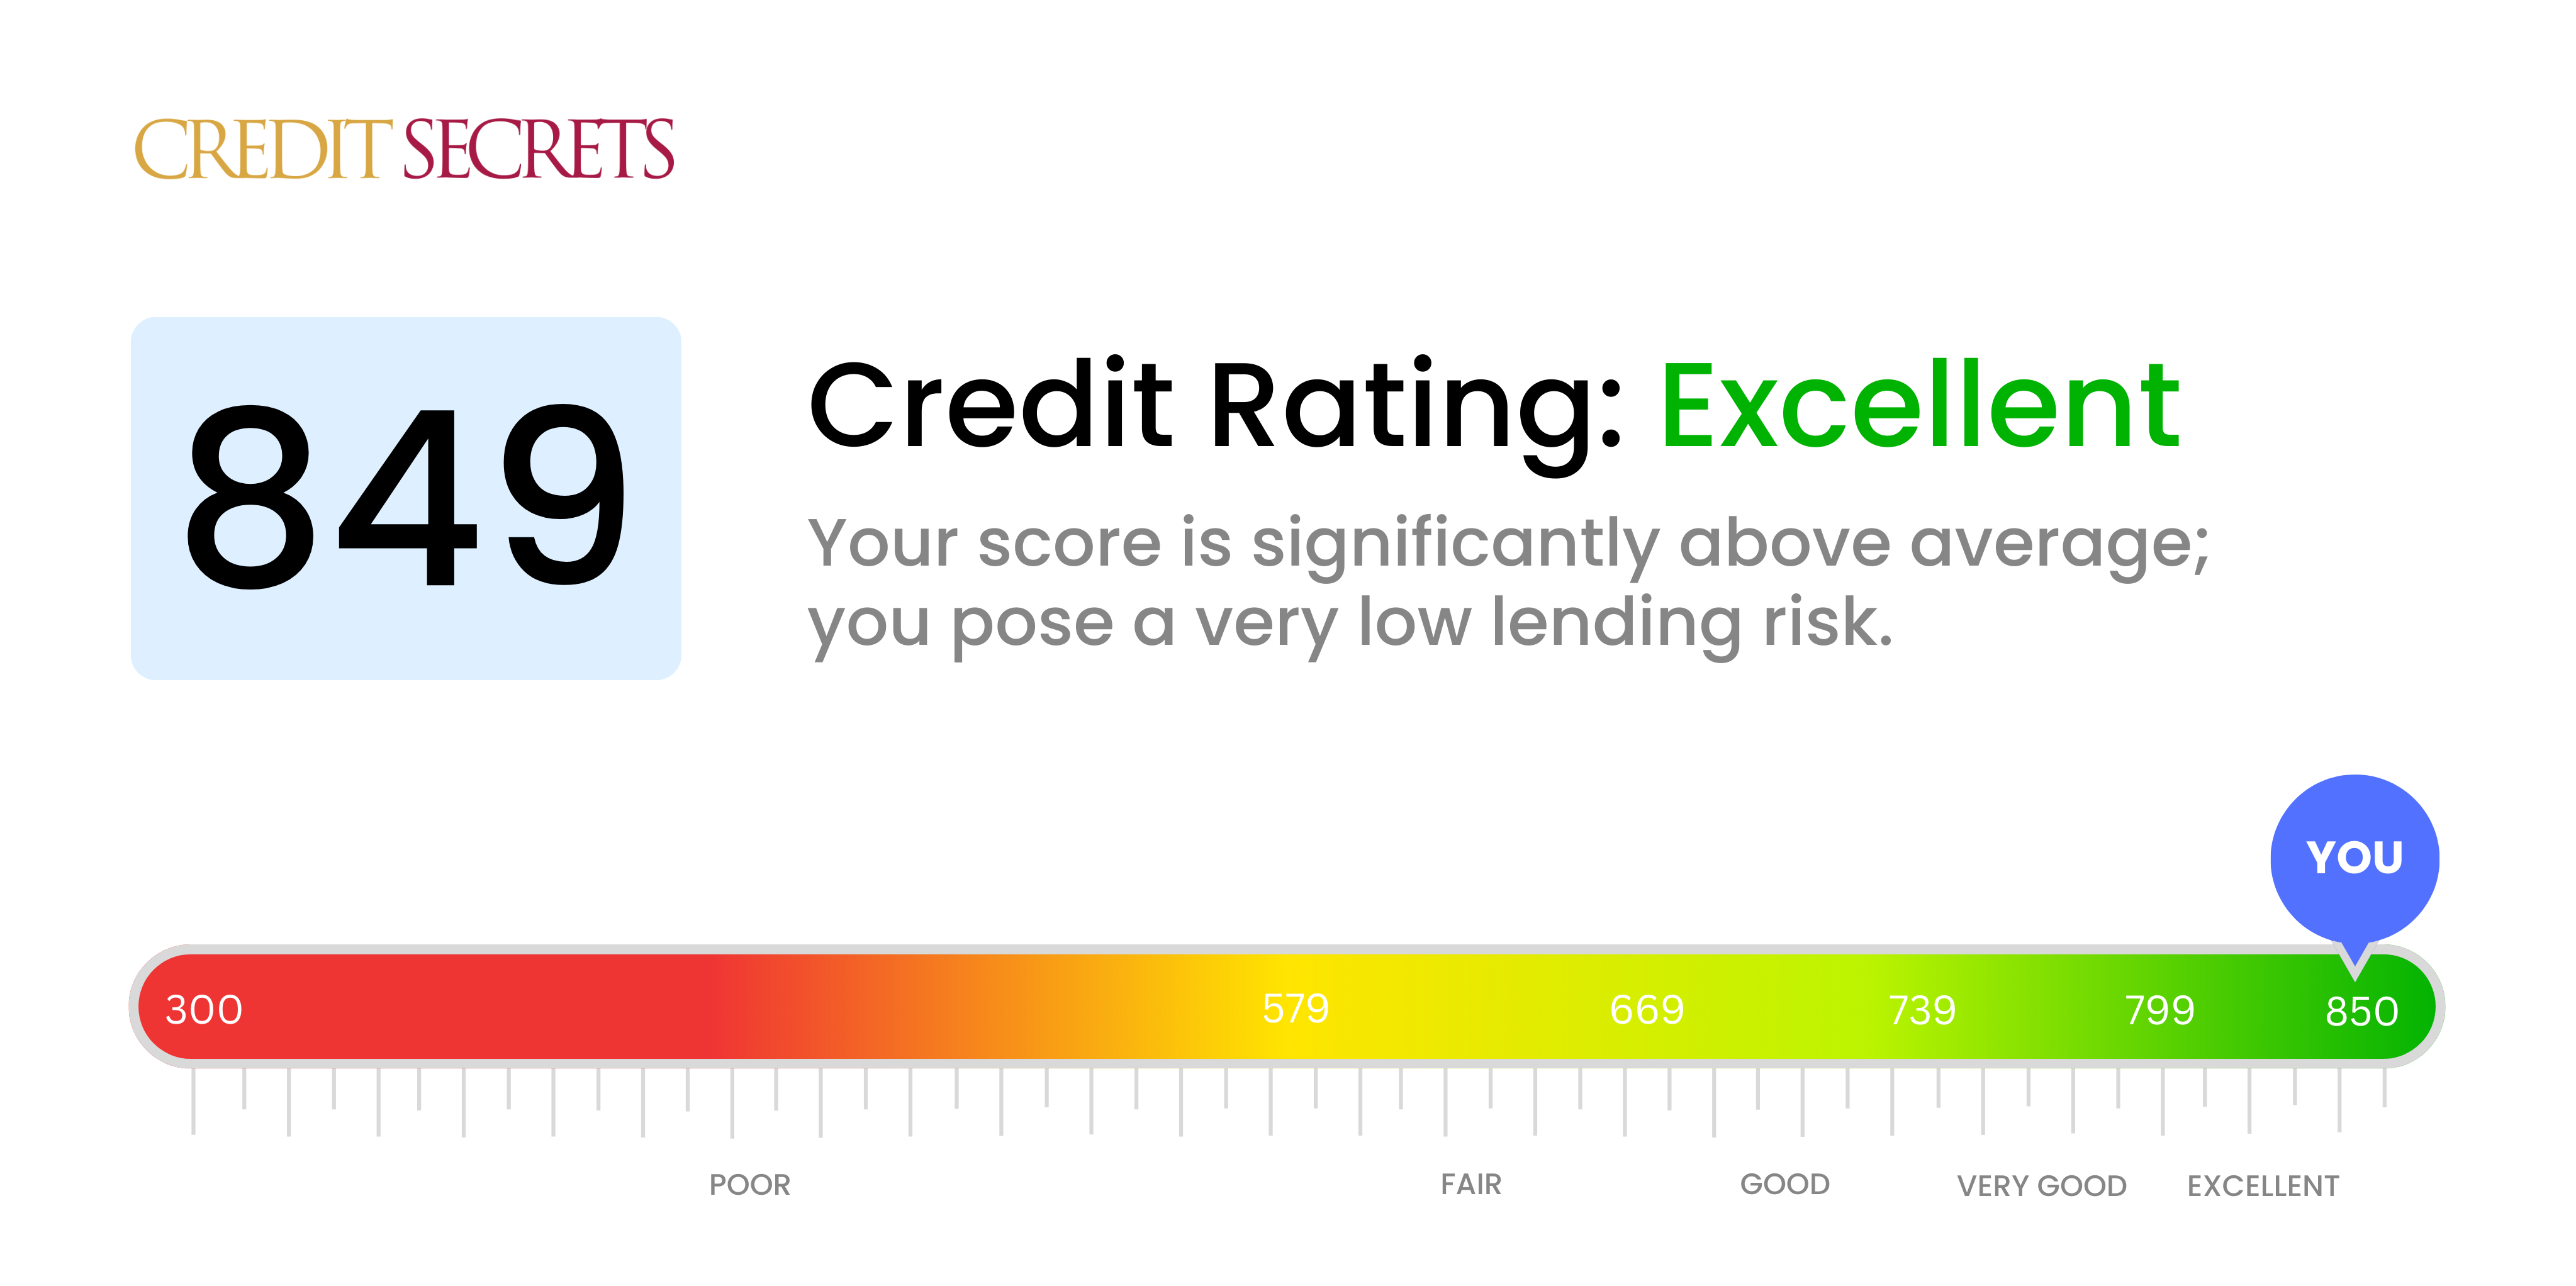 Is 849 a good credit score?